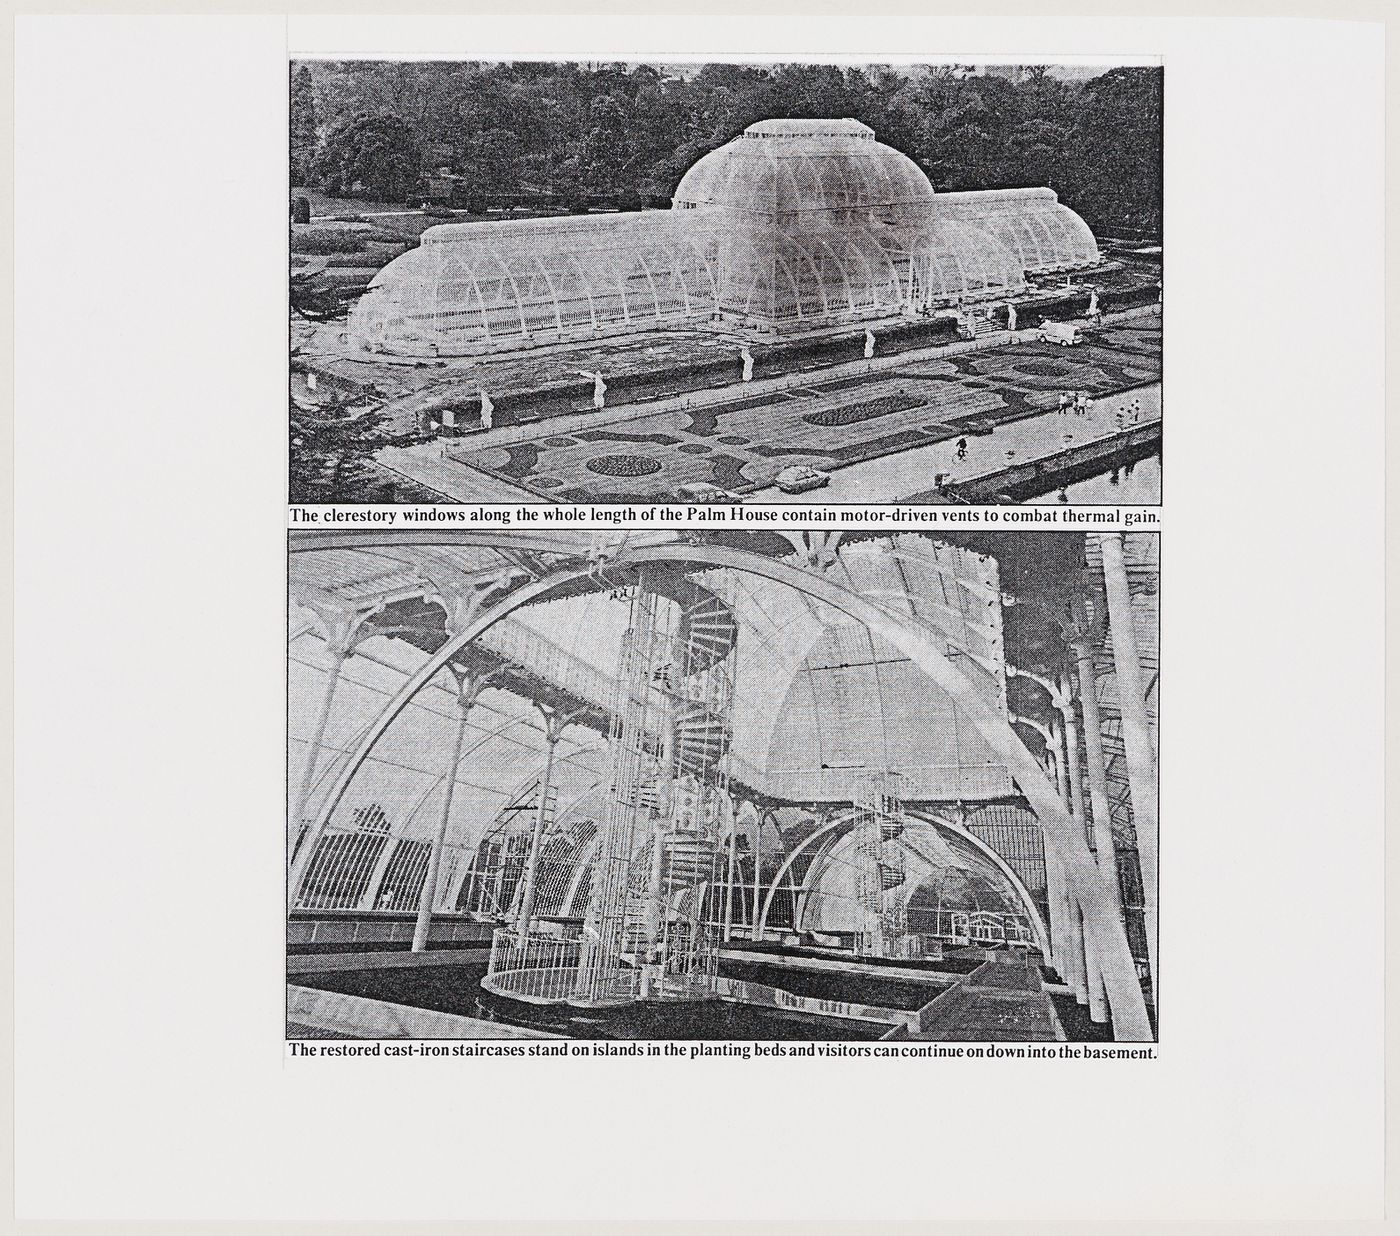 Exterior and interior views of the Palm House at the Royal Botanic Gardens, Kew (photocopy of illustrations from an unidentified publication, Serre (2) documentation)